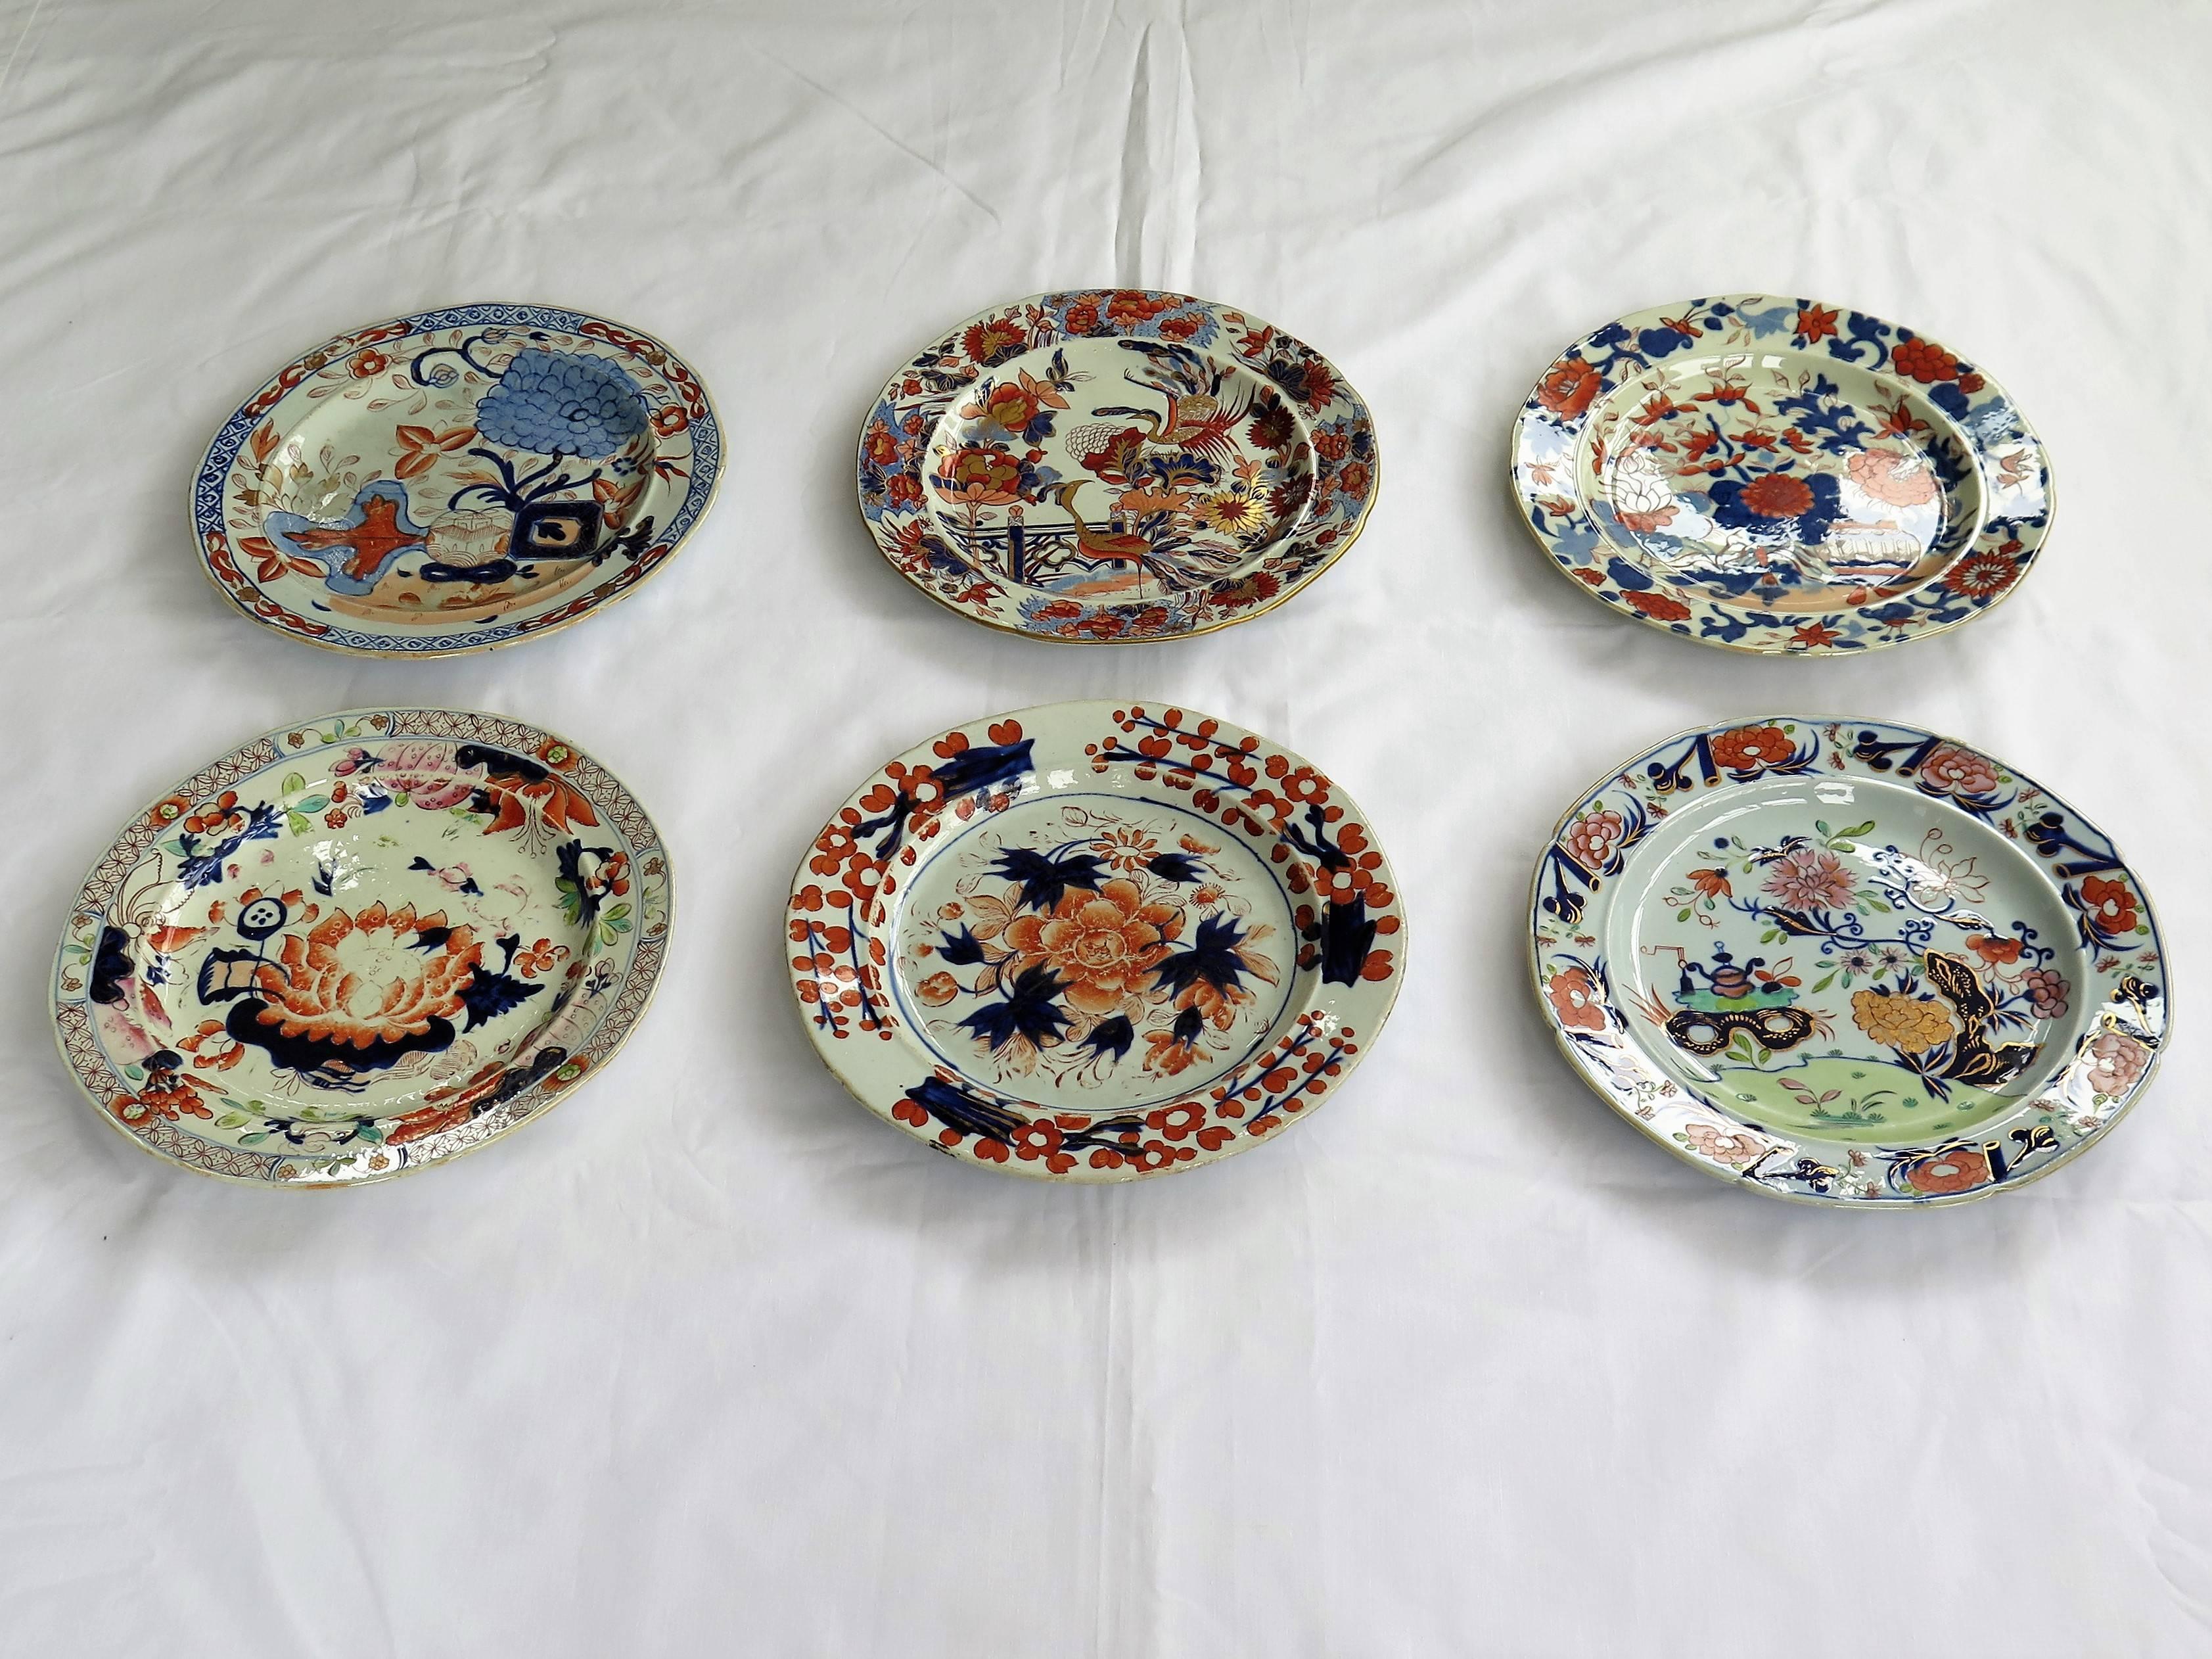 This is a harlequin set of six Mason's ironstone dinner plates, all dating to the earliest period between 1813 and 1820. 

All the plates are the same nominal size and shape, but have different patterns and base marks as follows; 

Top row left: